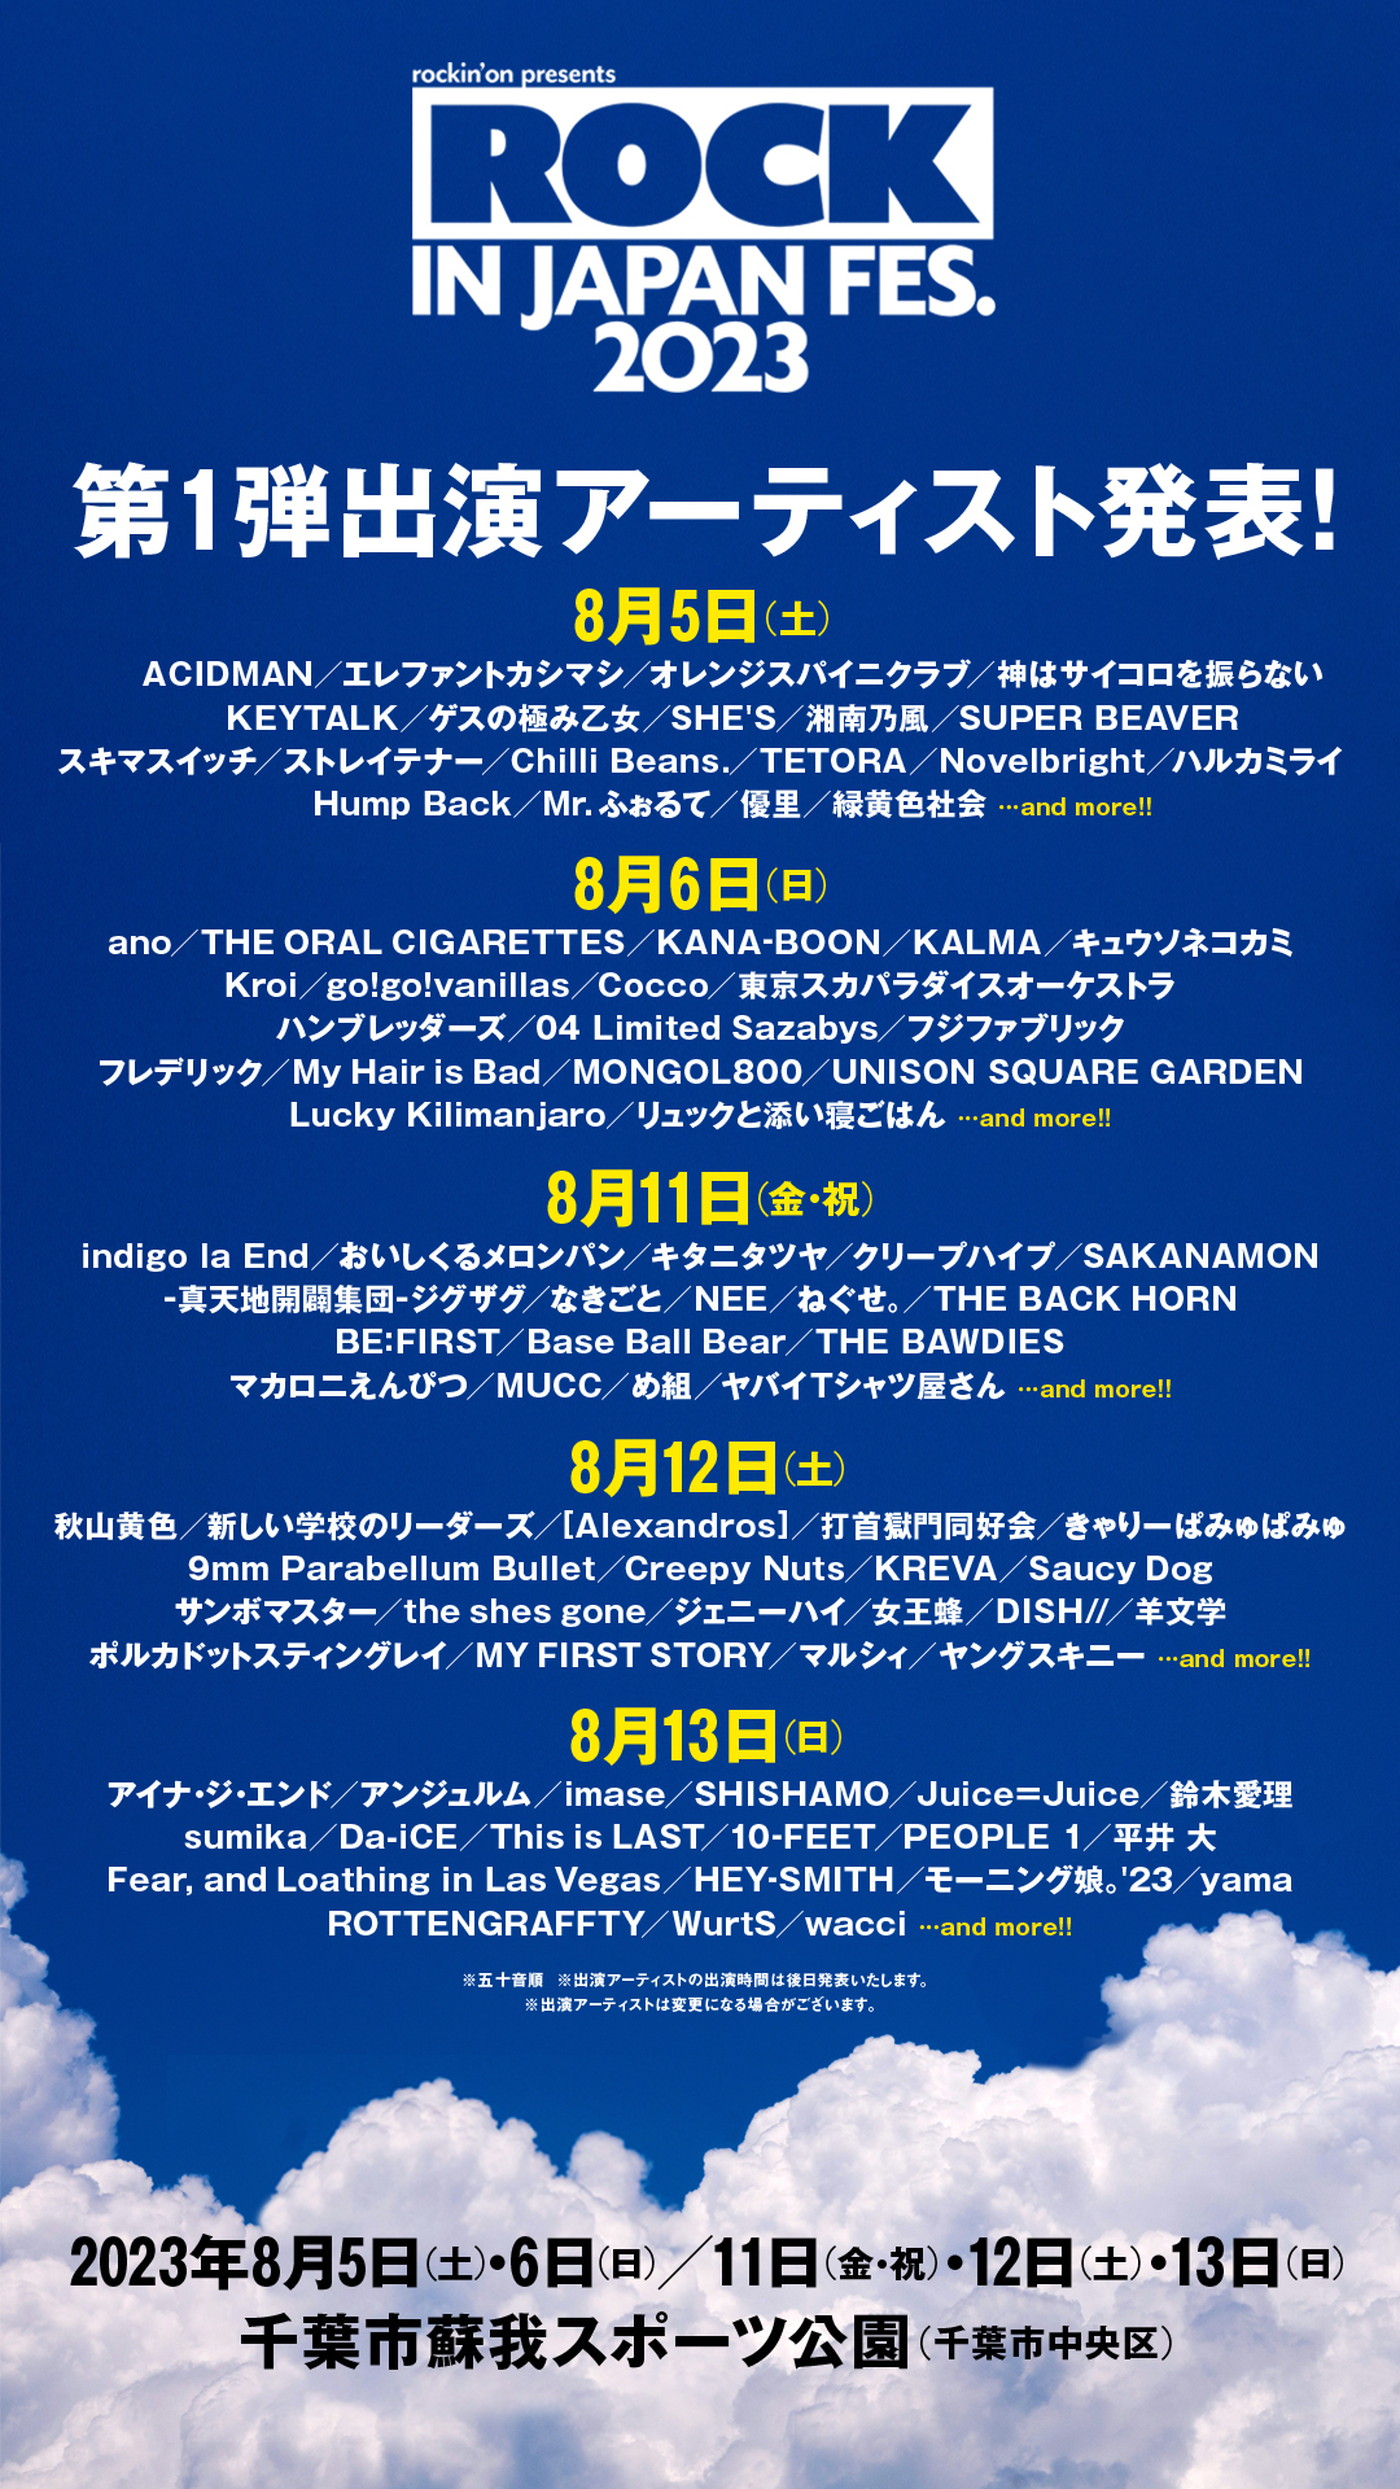 『ROCK IN JAPAN FESTIVAL 2023』第1弾出演アーティスト92組が決定！ チケット第1次抽選先行受付開始 - 画像一覧（2/2）